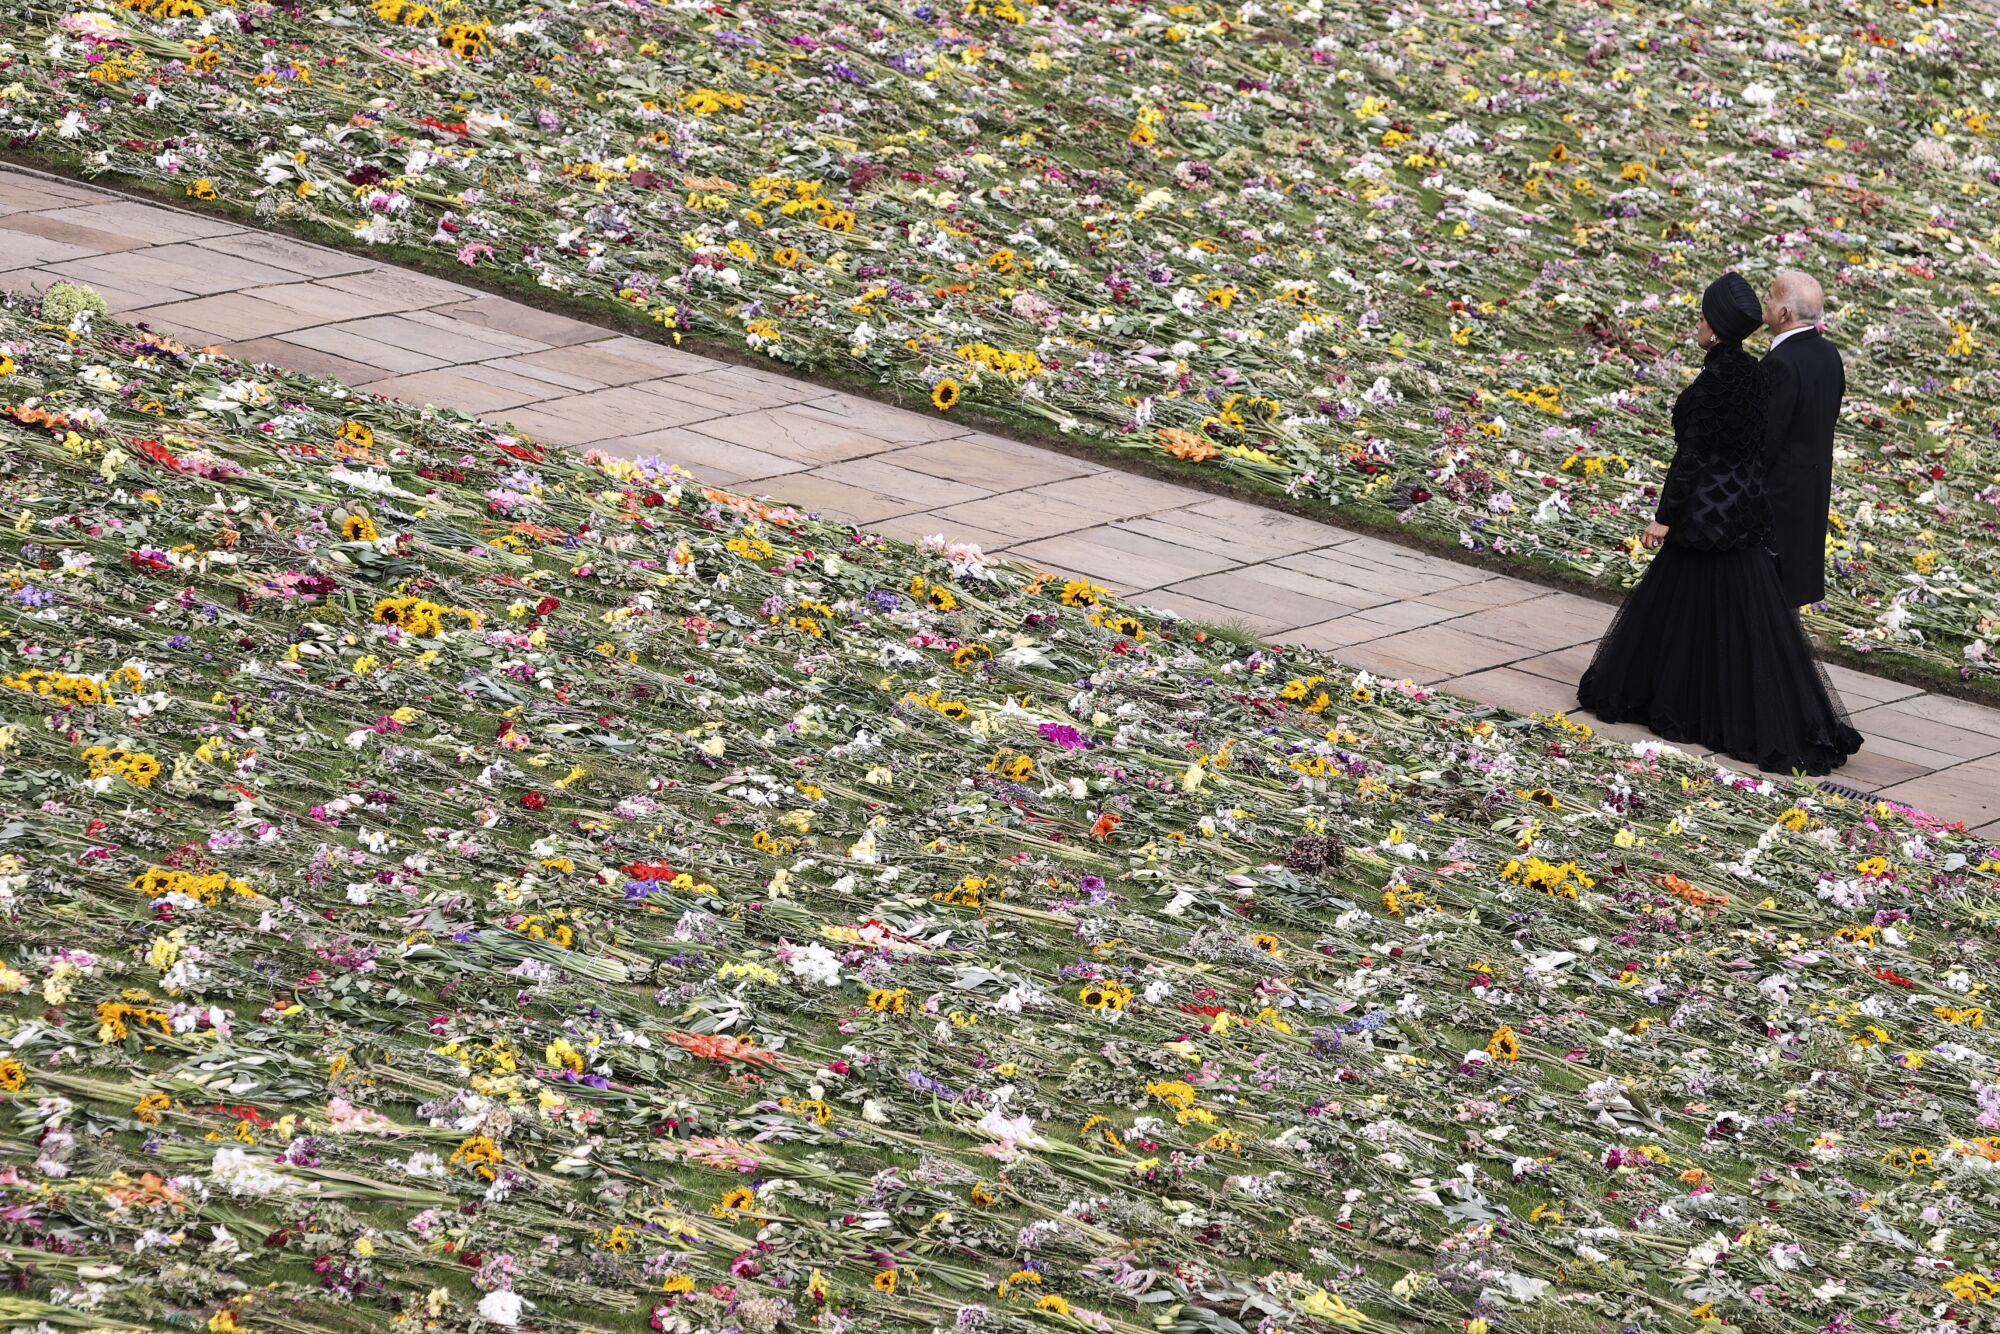 A man and a woman dressed in black walk along a sidewalk in front of a lawn covered in flowers.